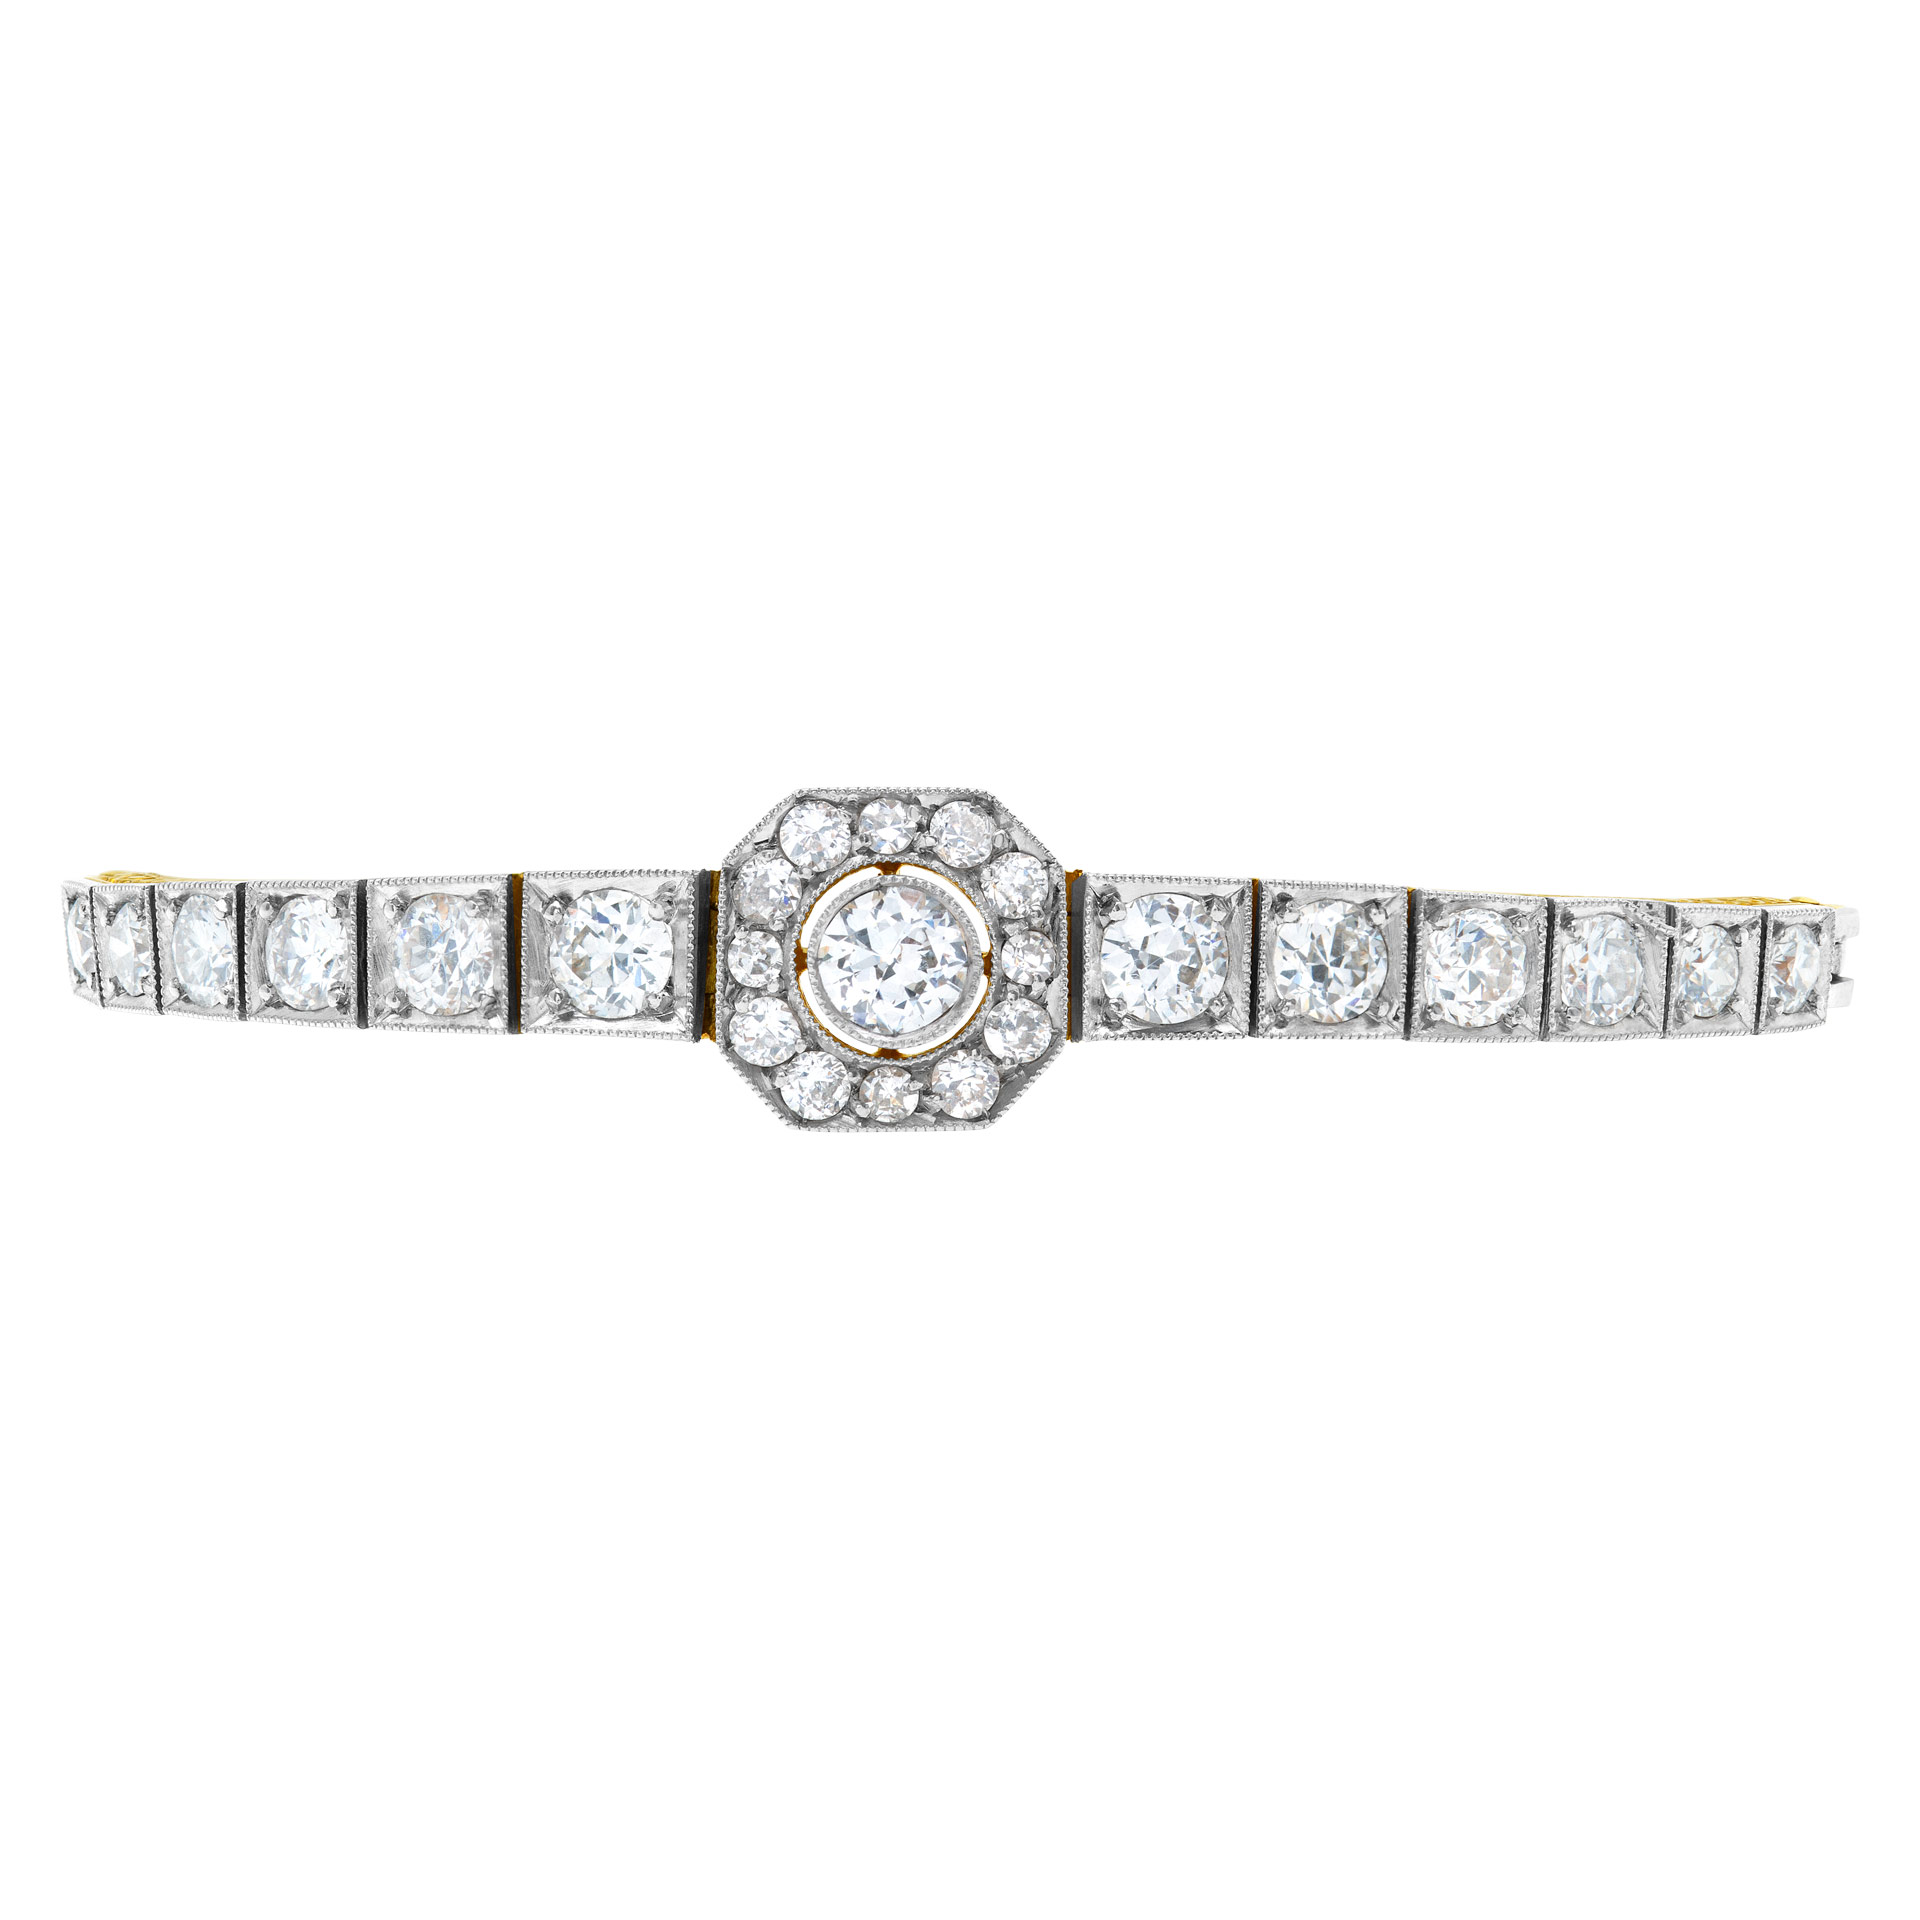 Diamond bracelet in 18k yellow gold with approximately 2 carats in diamonds image 1